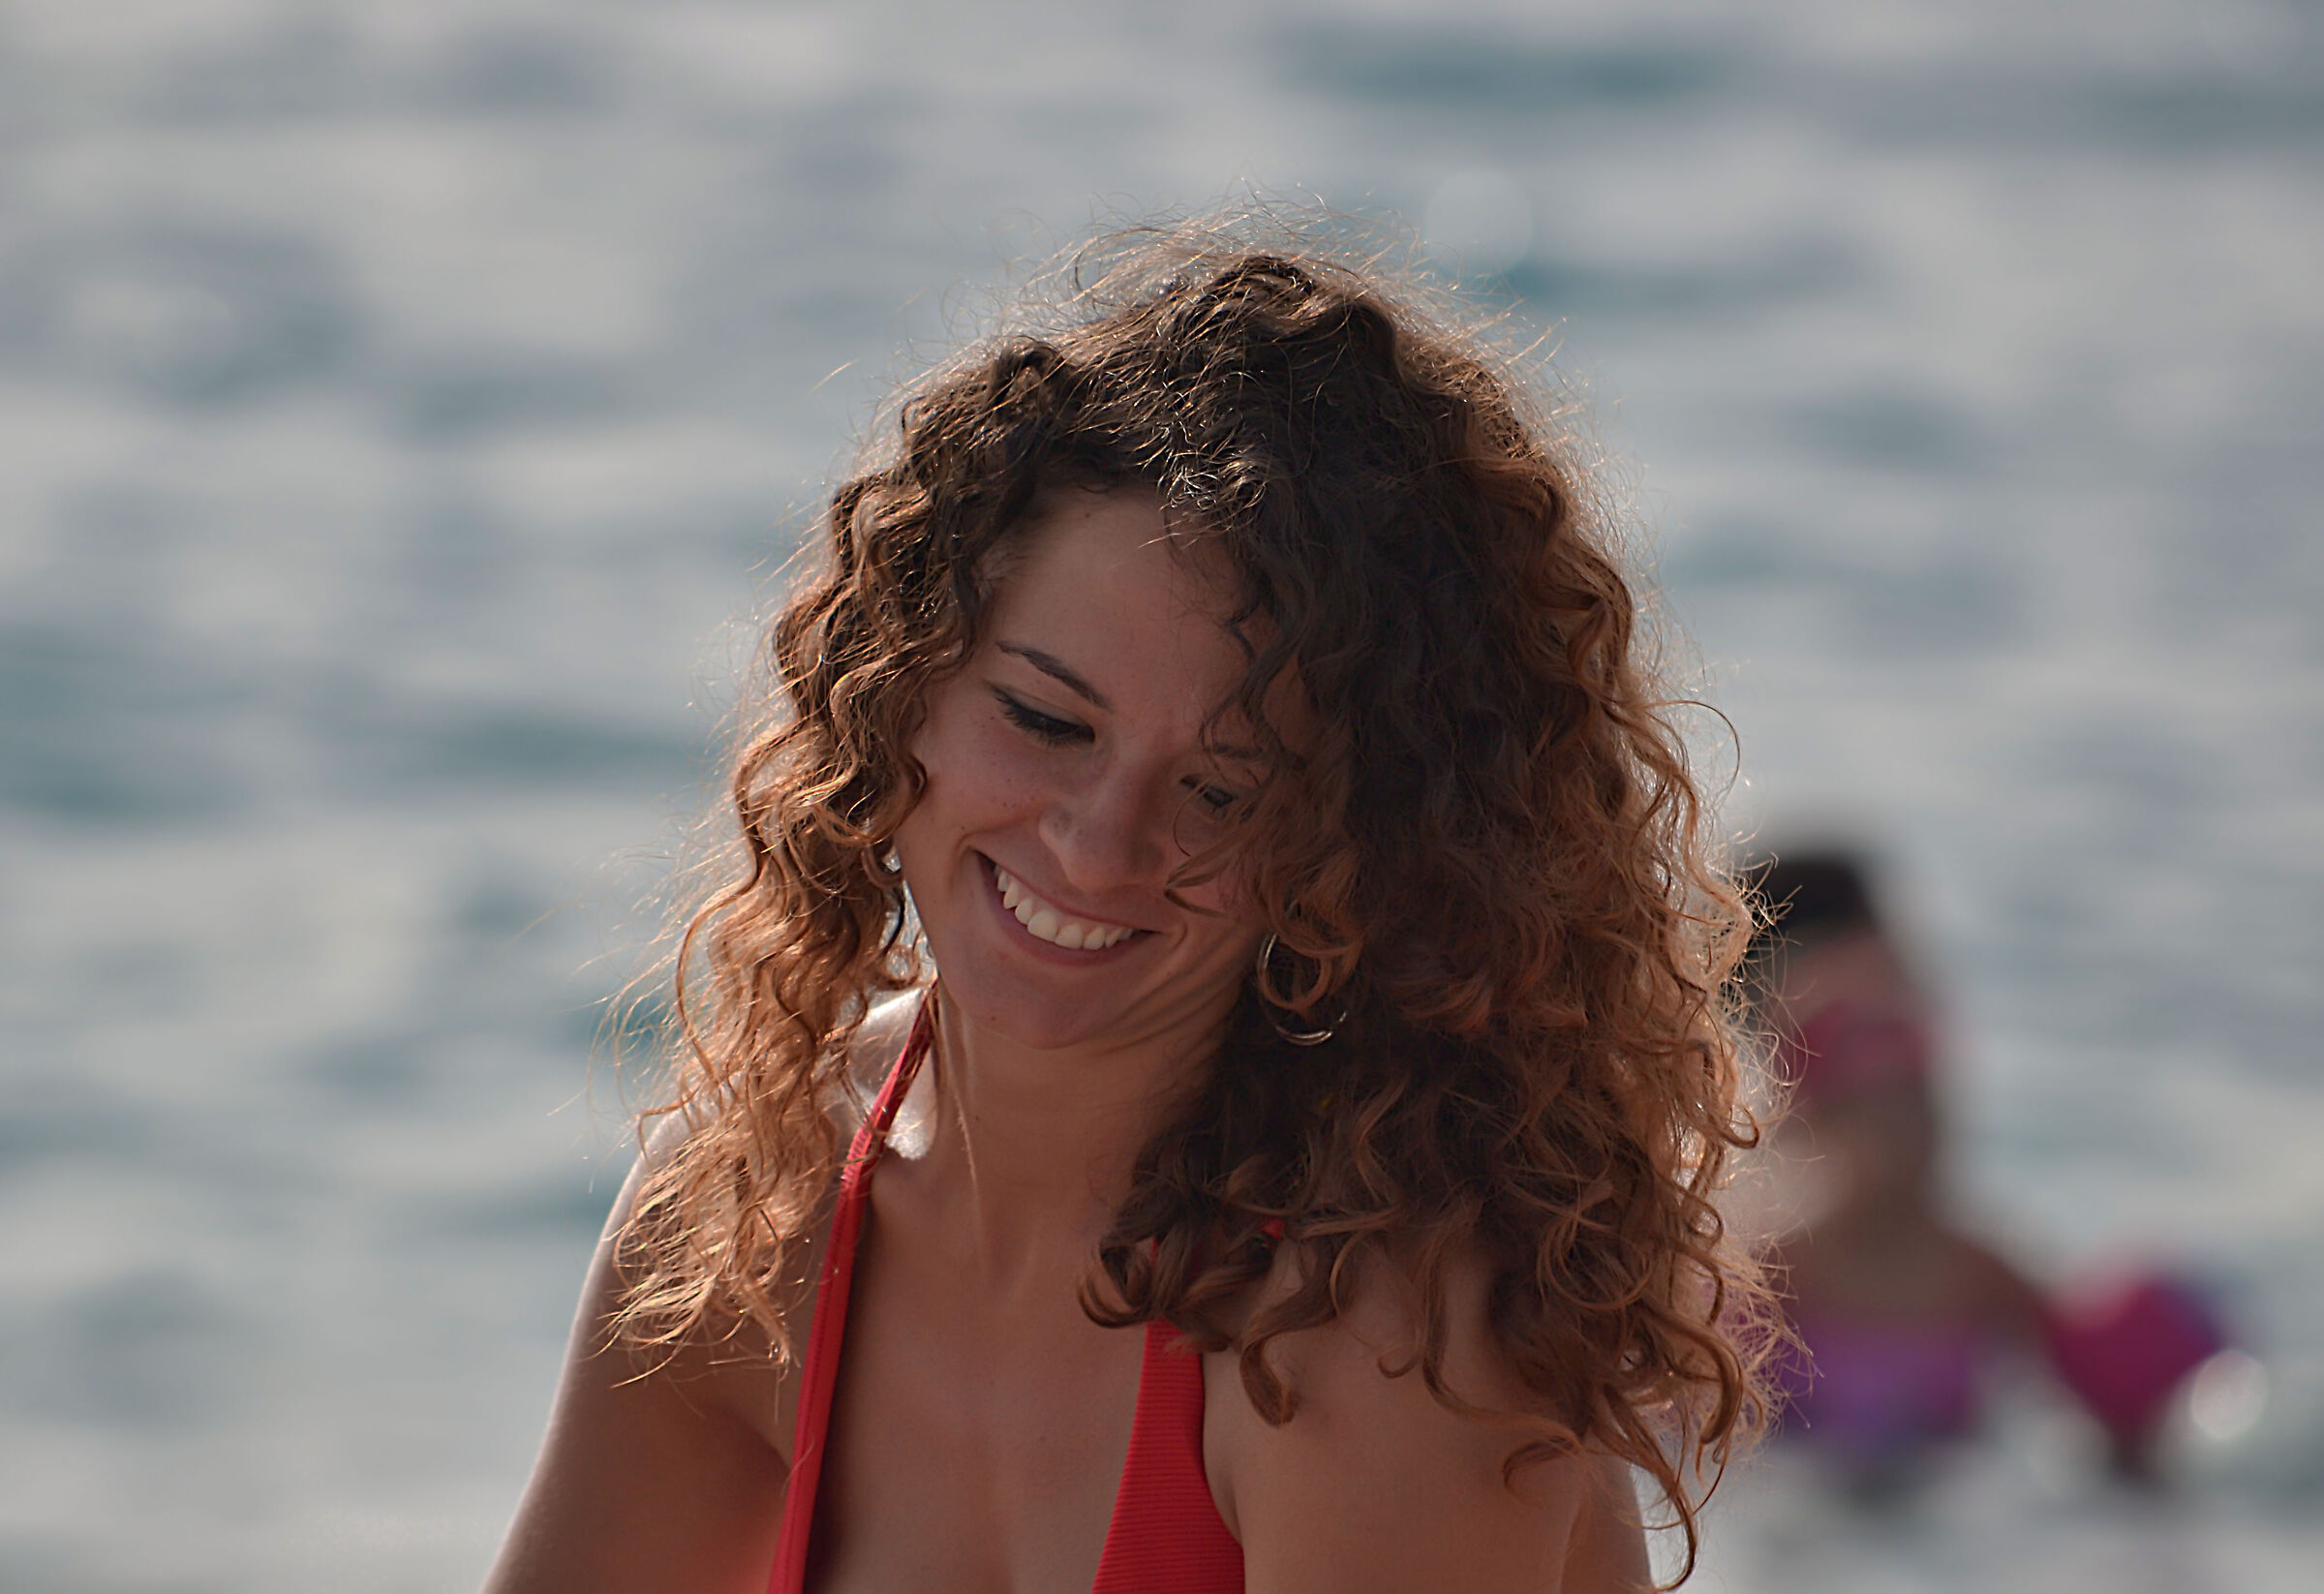 A nice smile from Calabria...